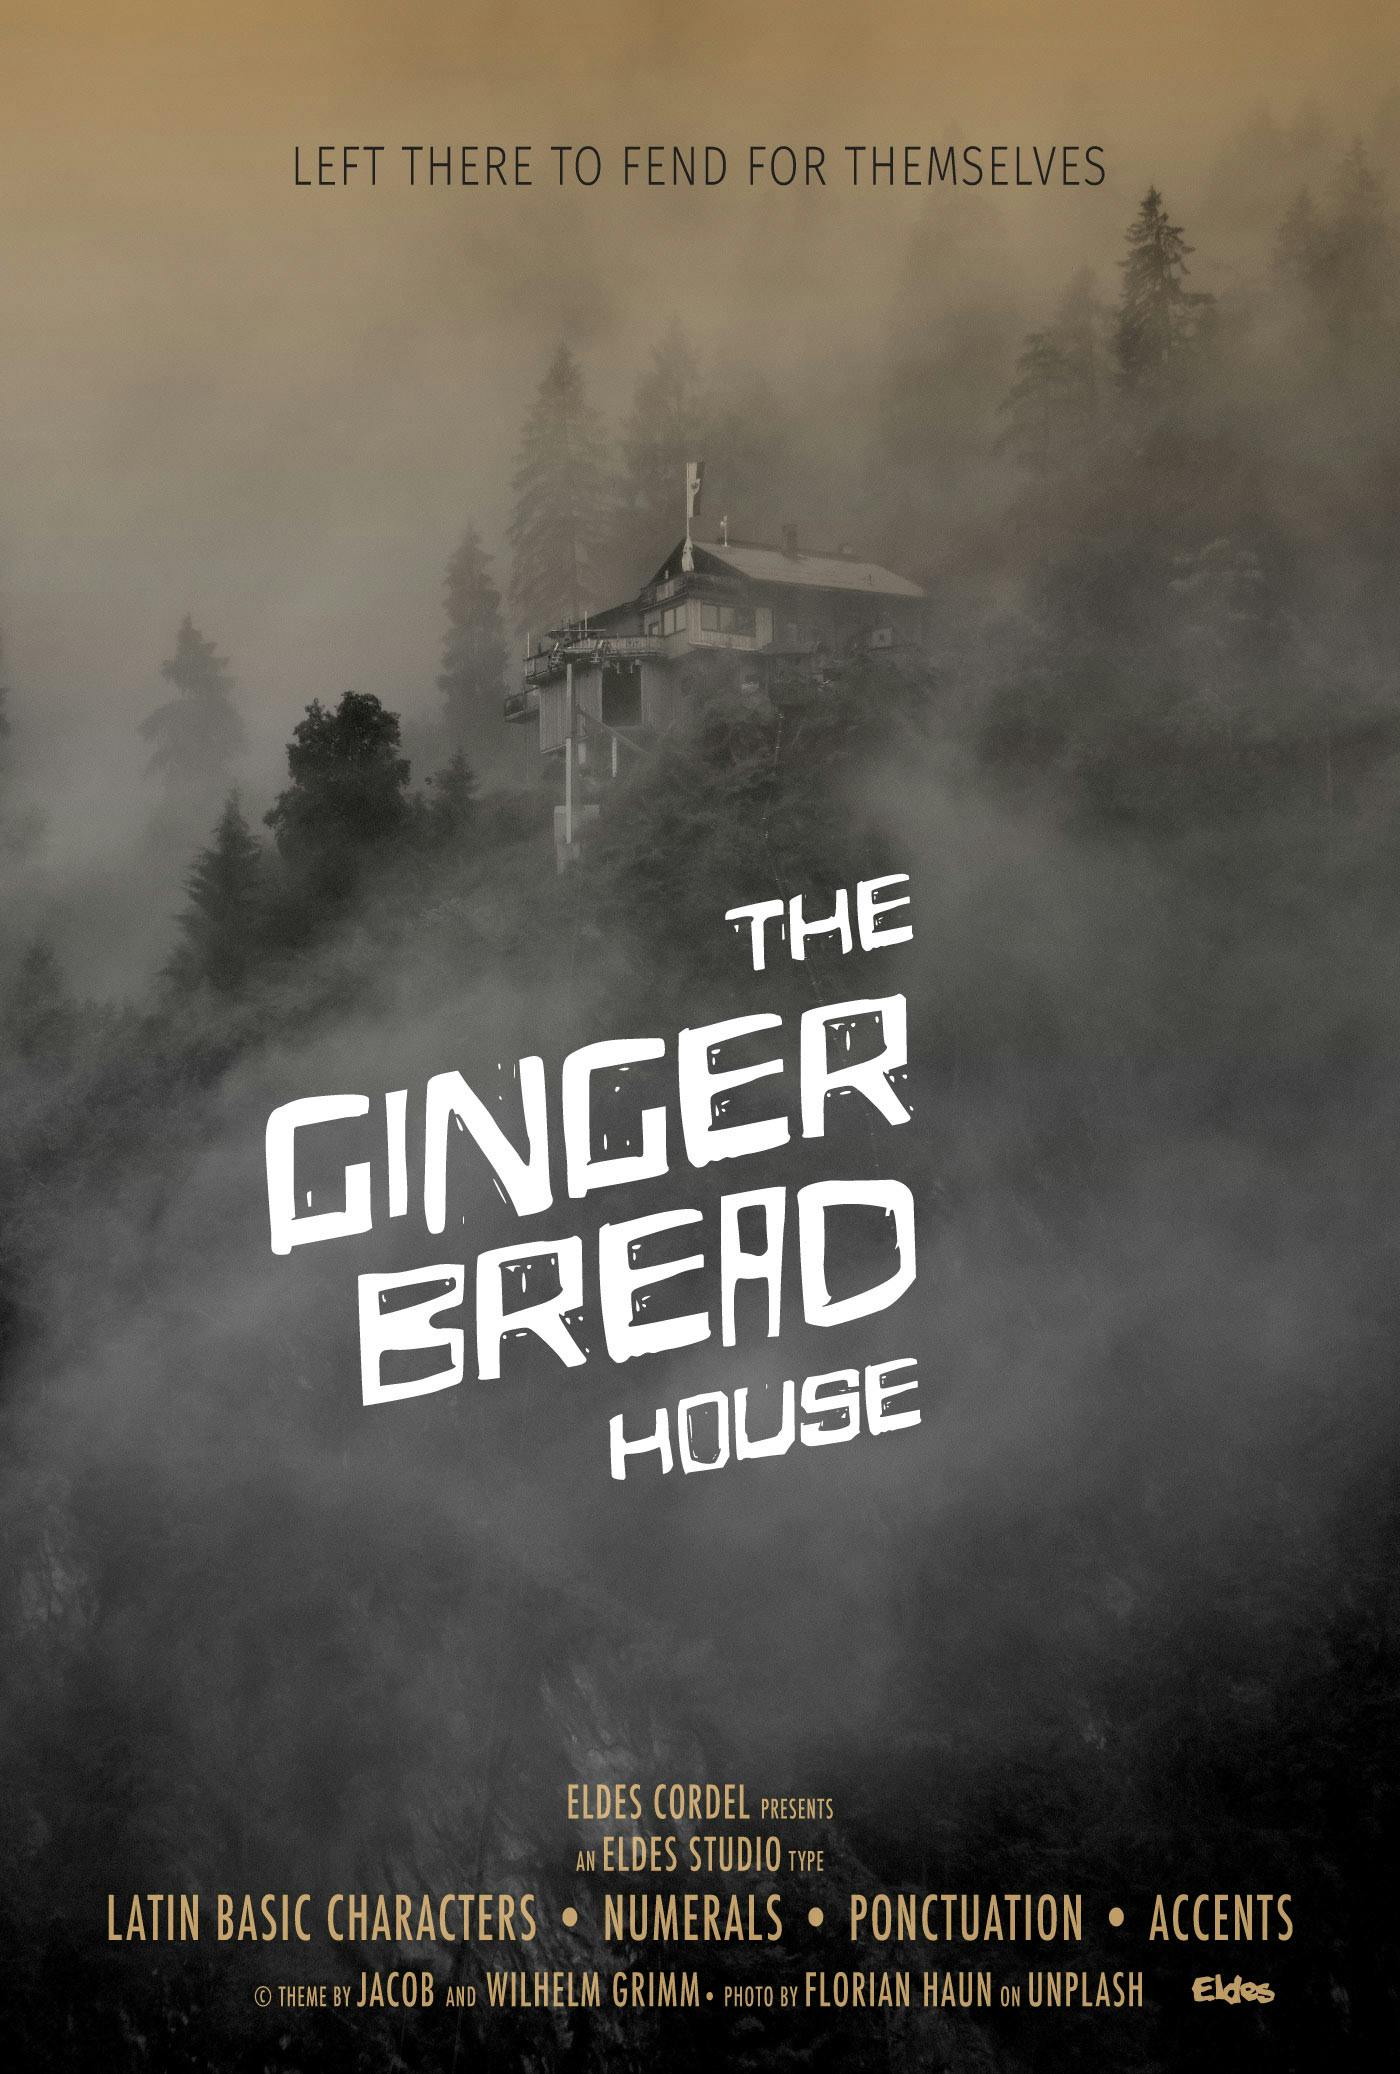 Use case: movie poster "The Ginger Bread House"